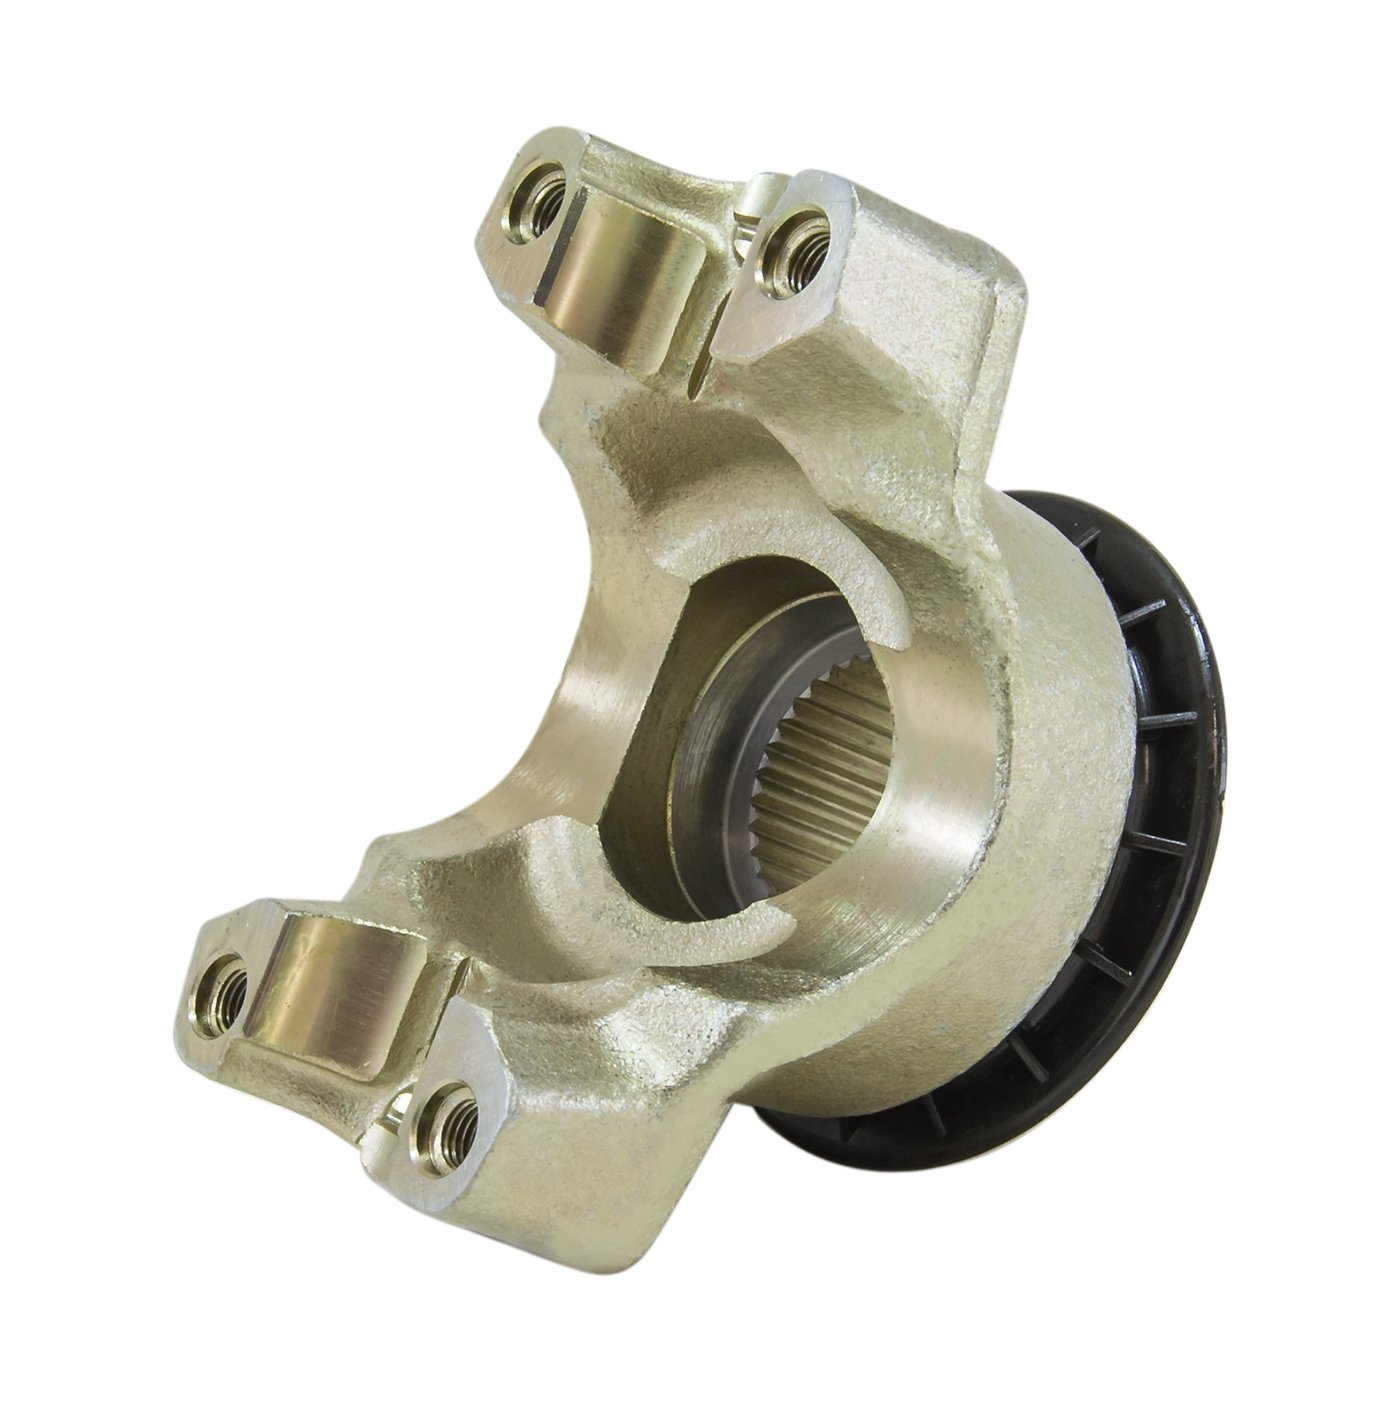 Short Yoke For '92 And Older Ford 10.25 in. Diff, 1410 U-Joint